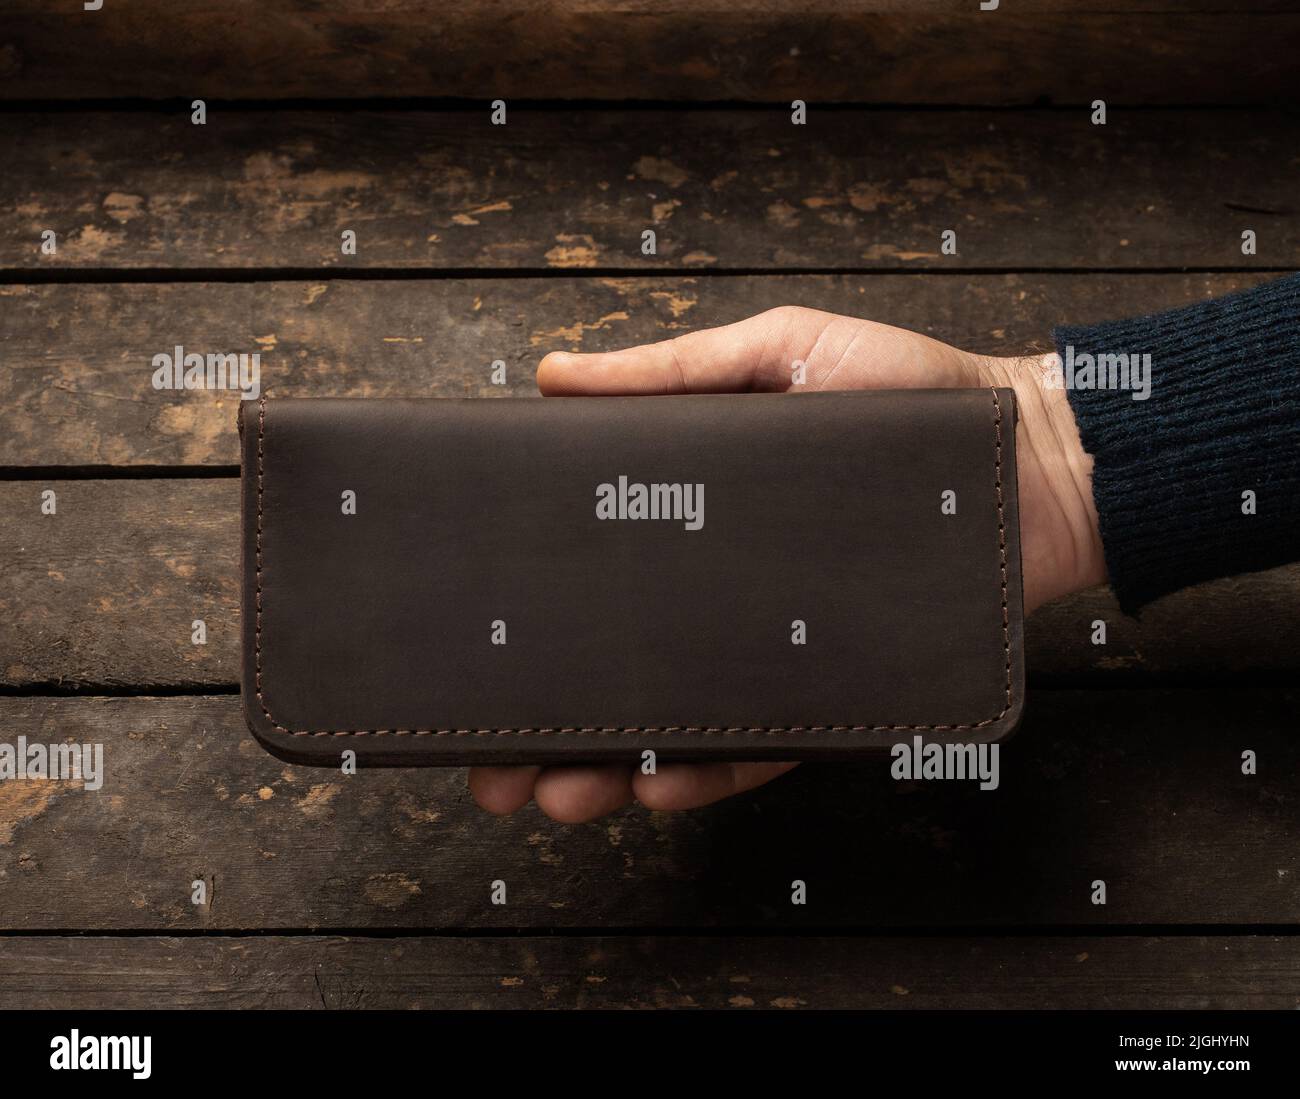 Leather men's wallet in a man's hand on a vintage wooden background. Flat lay. Place for text. Copyspace Stock Photo